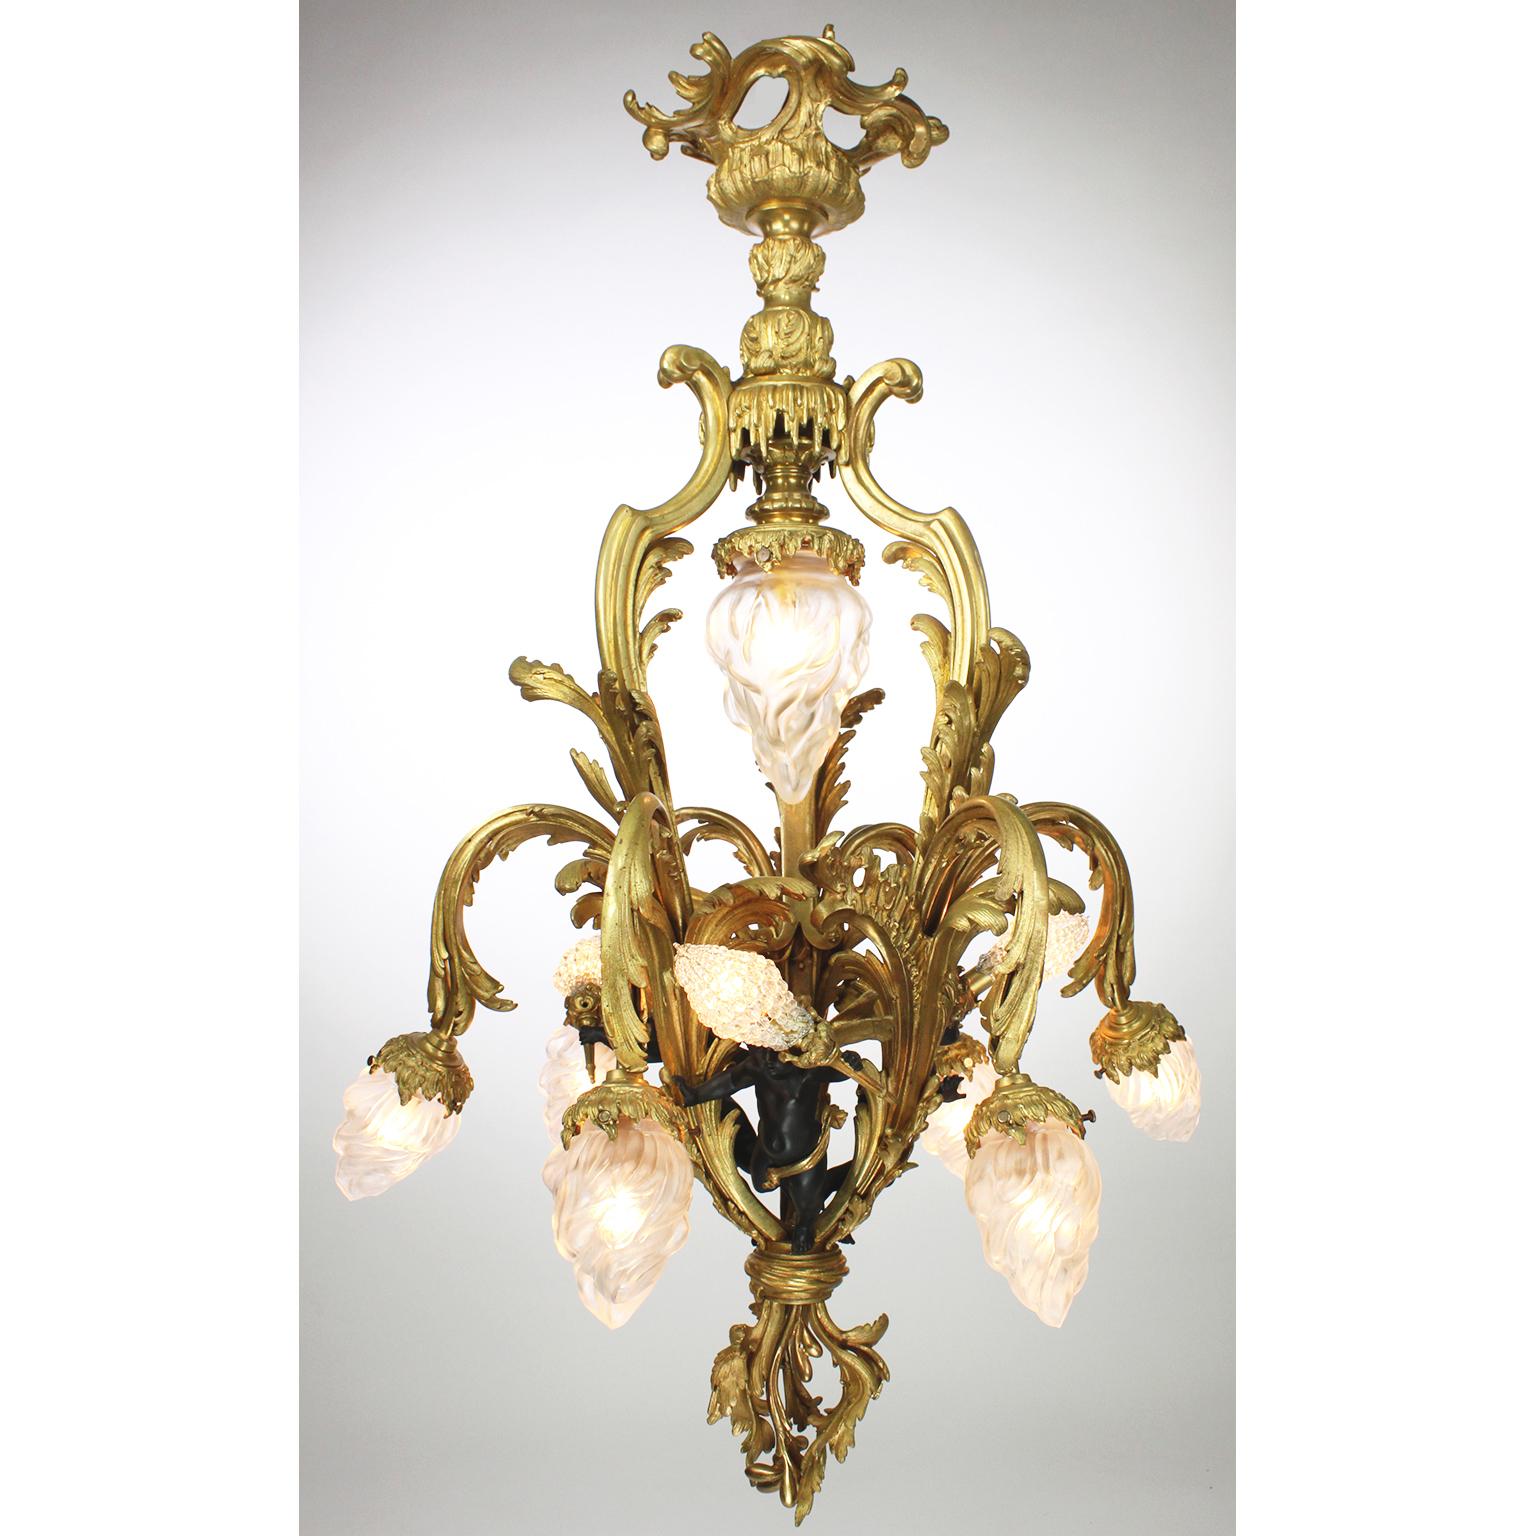 A very fine and rare French Belle Époque gilt bronze and ebonized-patinated bronze ten-light figural chandelier, with three winged cherubs, each holding a flame light with beaded glass bulb covers, the six outer lights with frosted glass flame